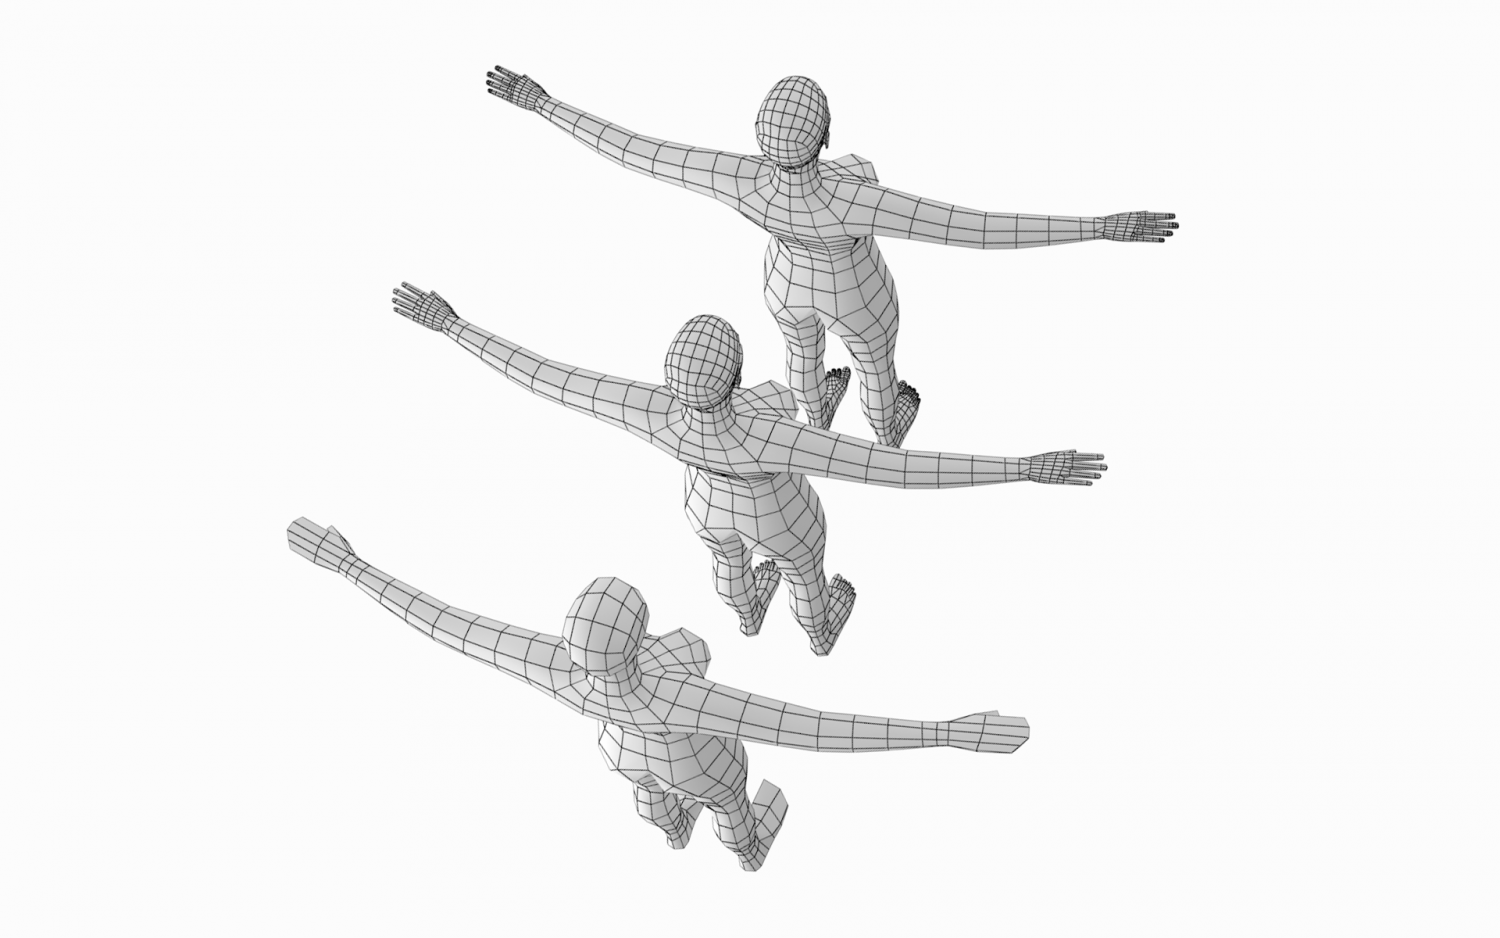 Pose goes back to T-pose in render - Animation and Rigging, t pose character  - thirstymag.com